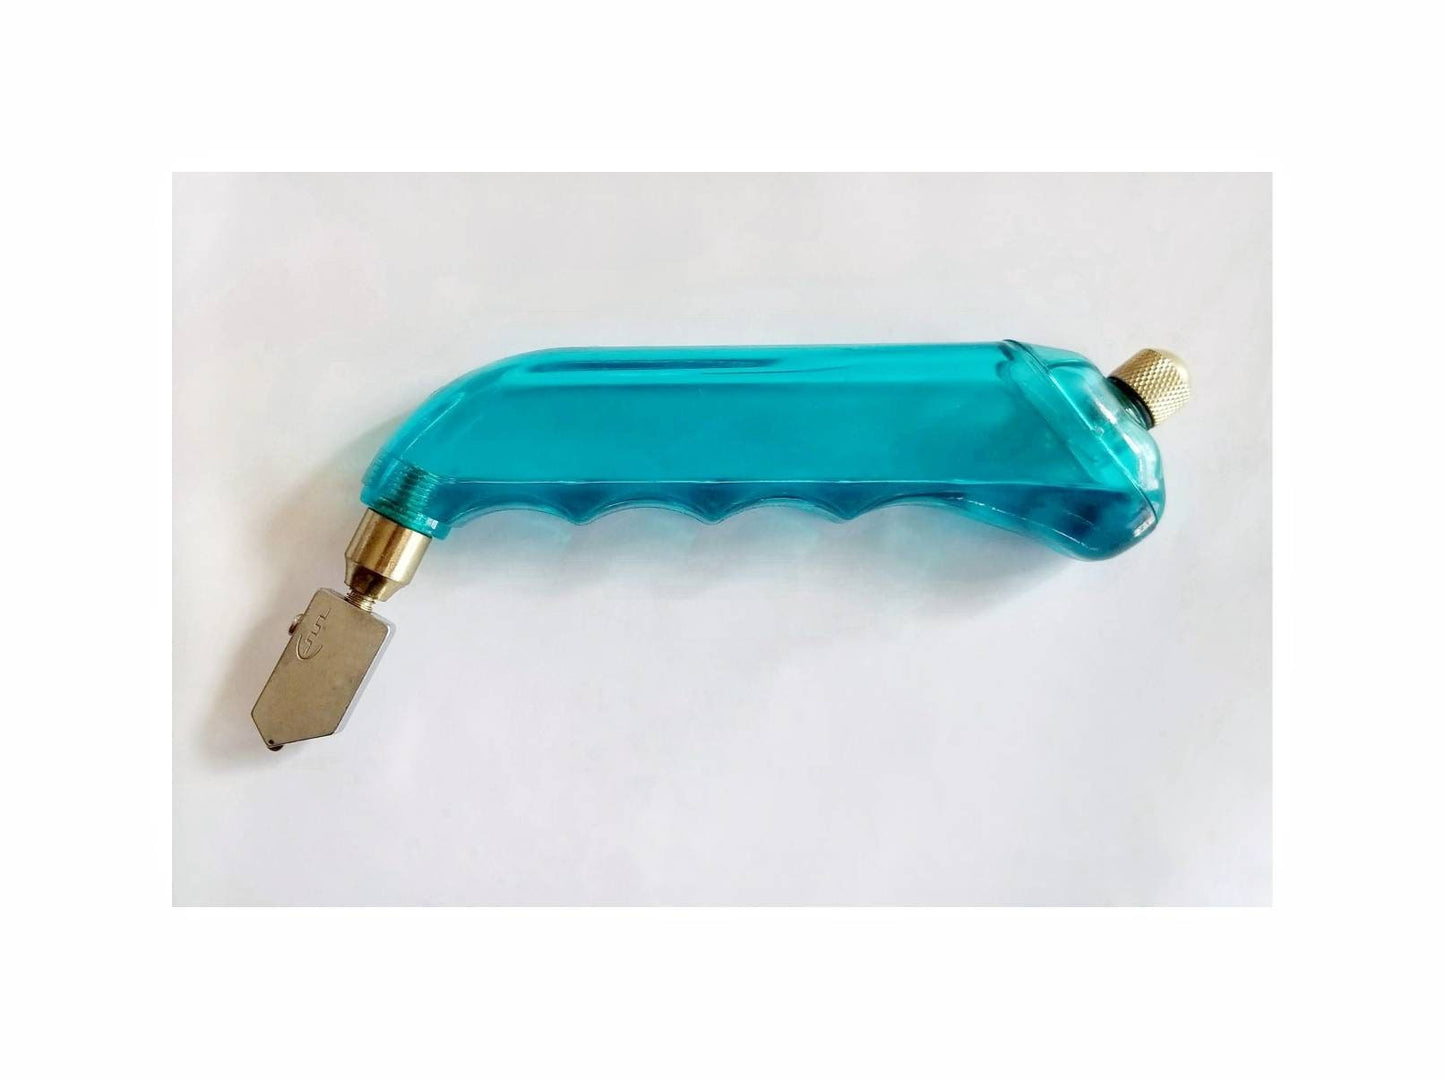 Glass Cutter for Stained Glass & Mosaic Projects. Carbide Wheel, Oil resevoir. Comfortable Palm Grip Handle. Economical Beginner Glass Tool.